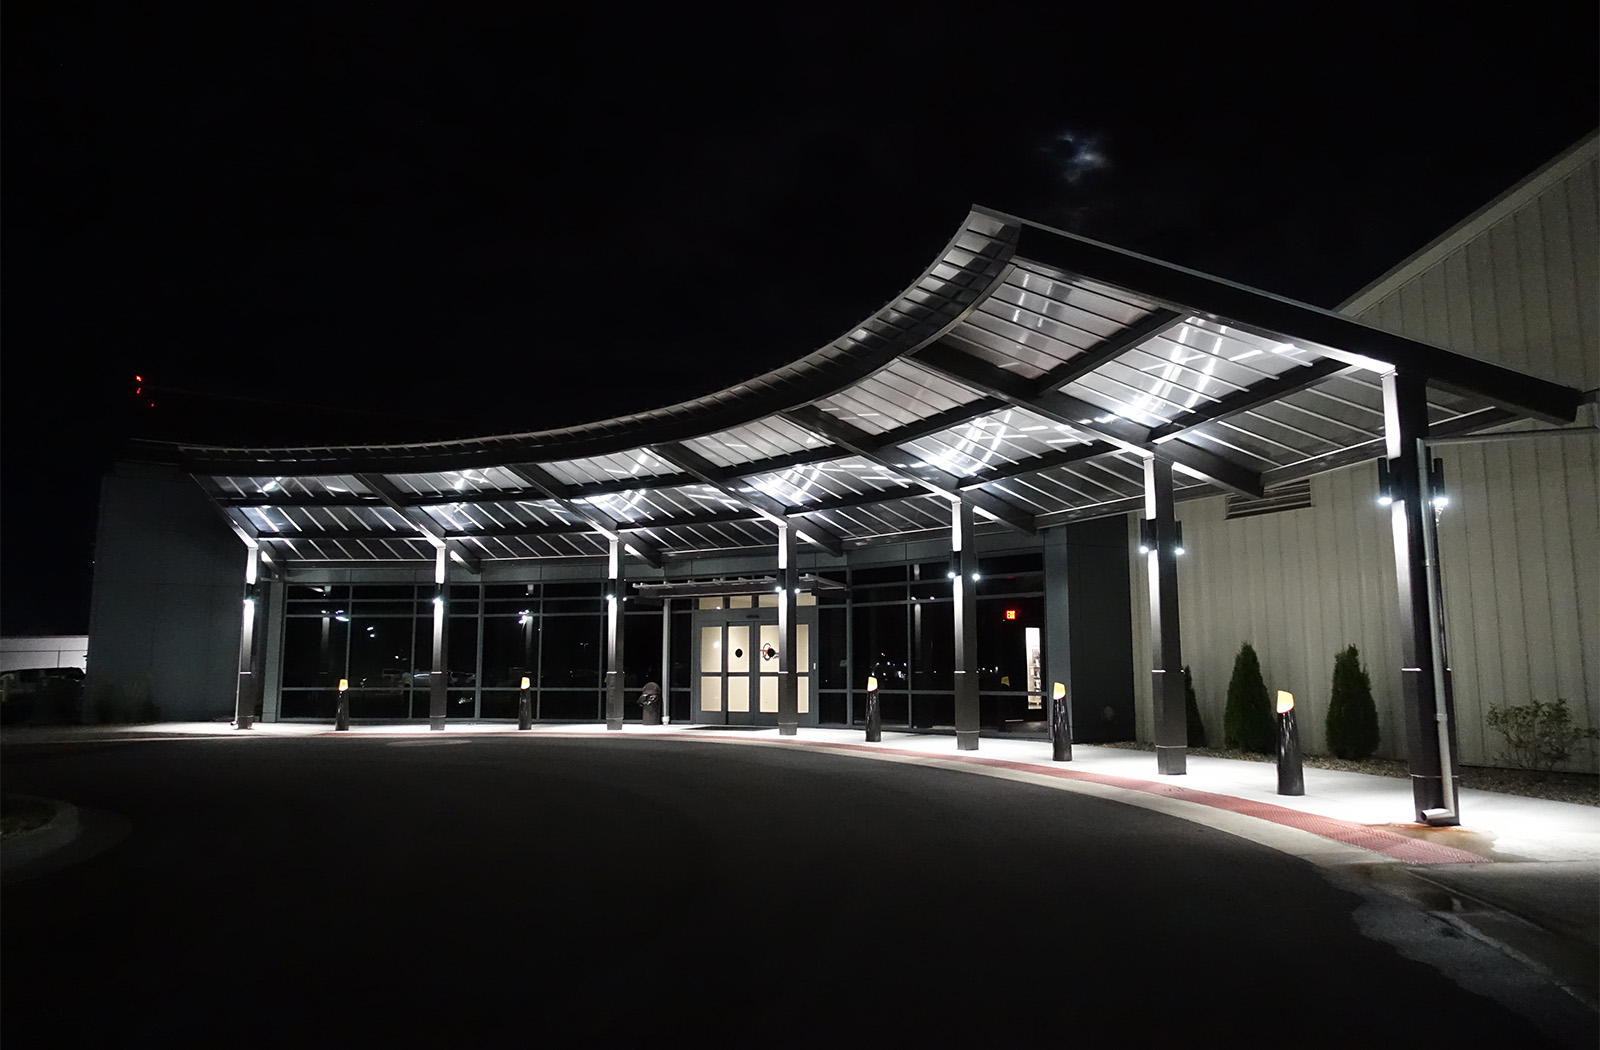 Steller Aviation-60168d-22x85-Entrance Canopy-Corporate Campus